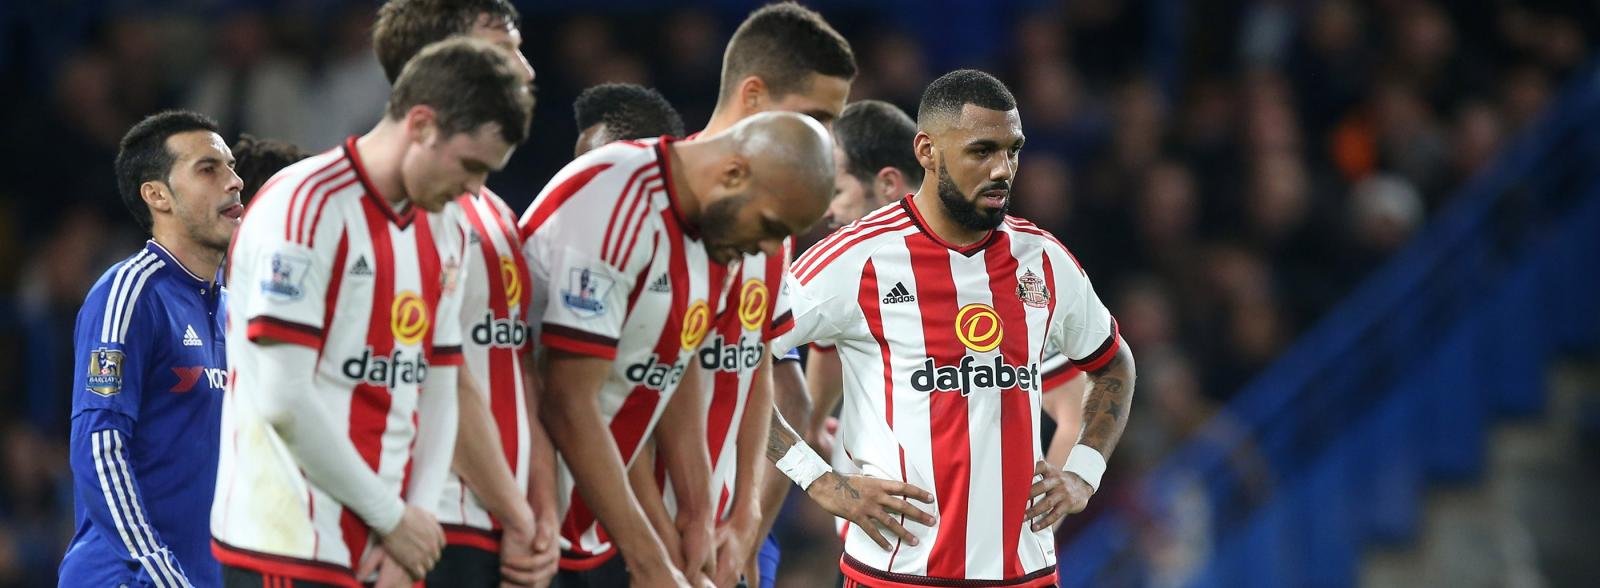 It’s the daft stats that make you love Sunderland Football Club